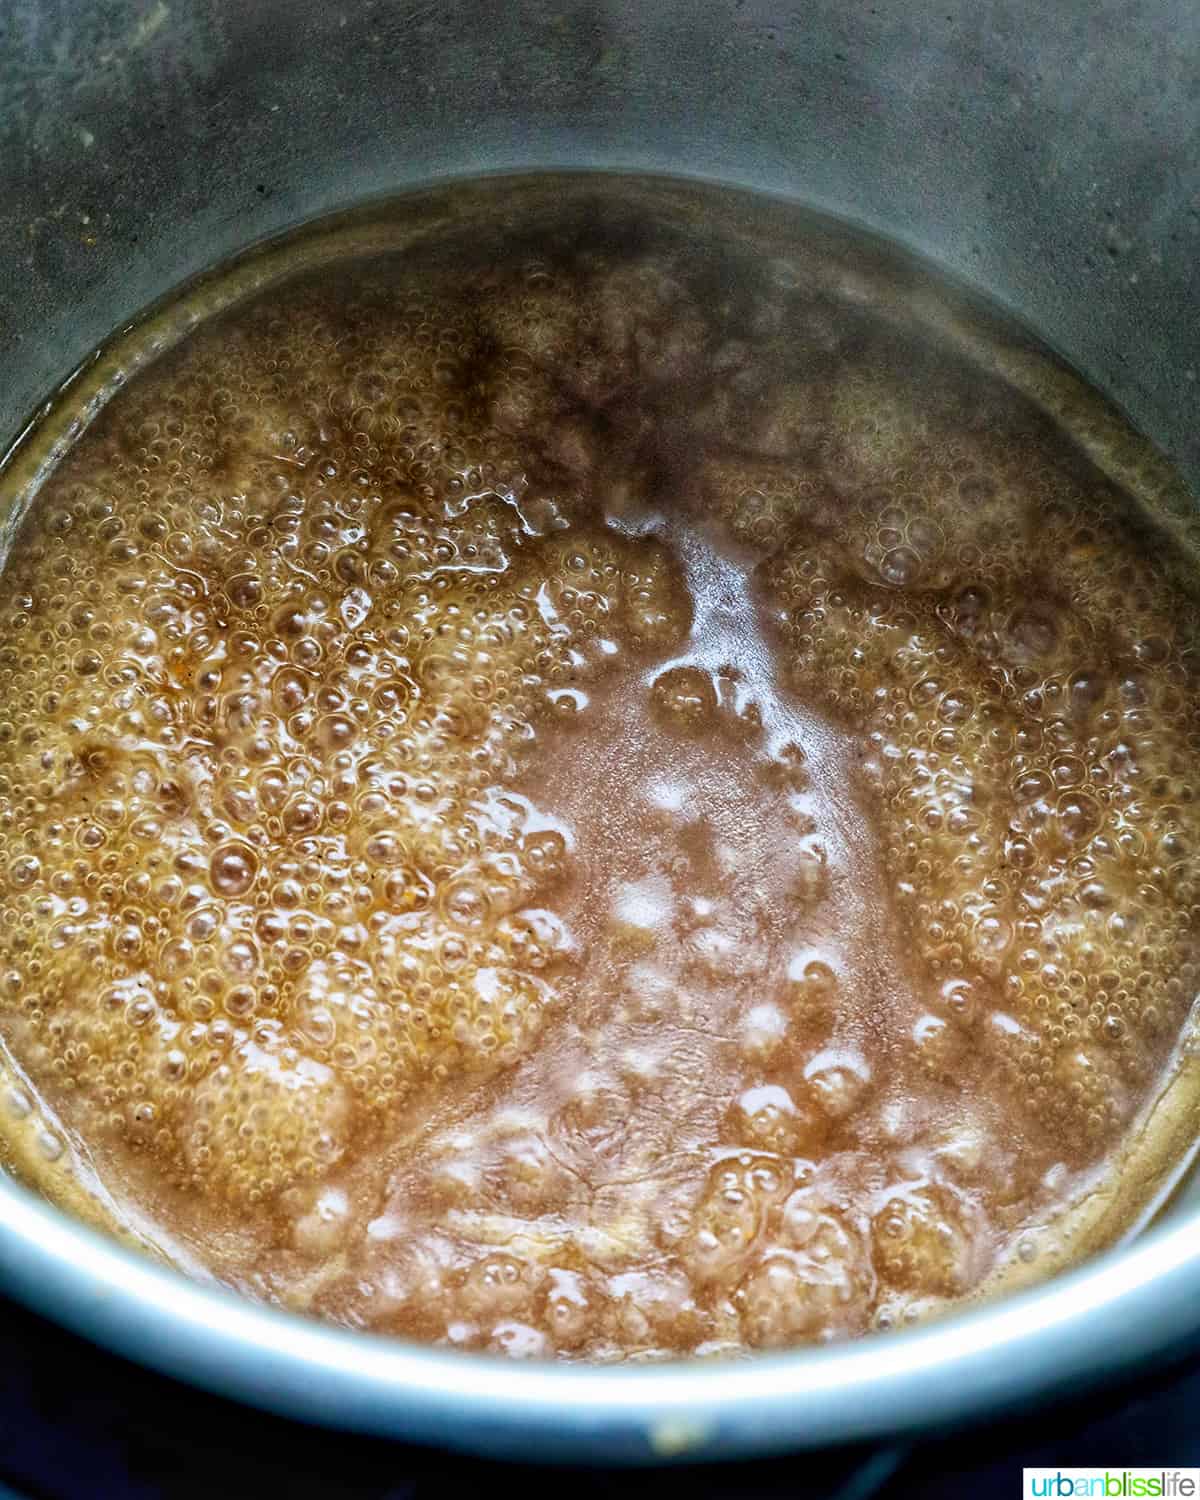 gravy bubbling and thickening in an Instant Pot.